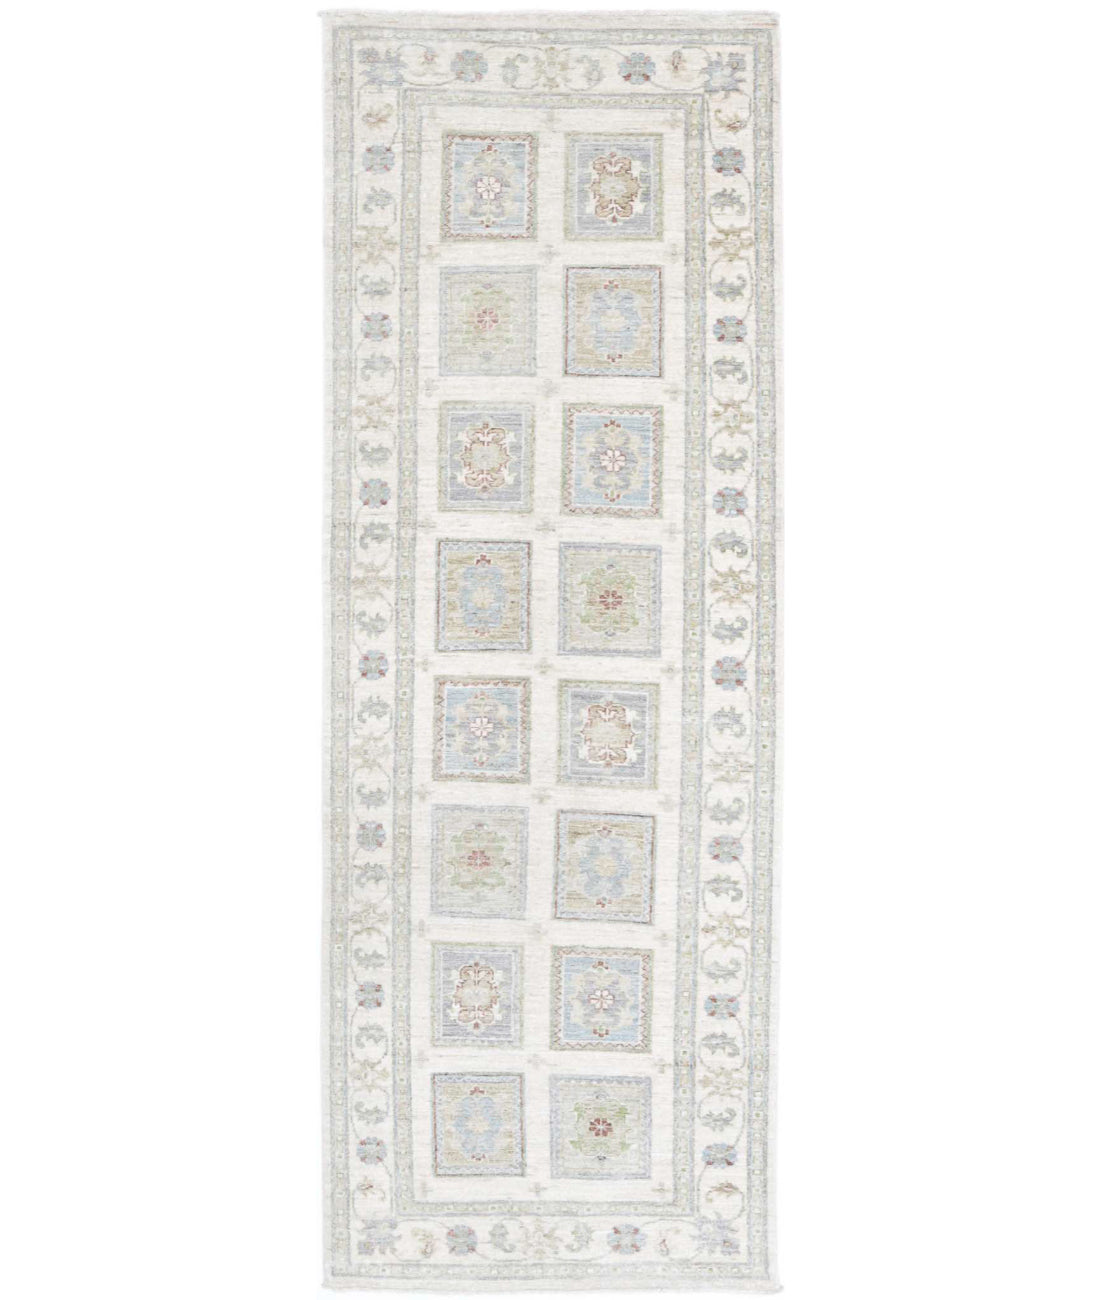 Hand Knotted Serenity Wool Rug - 2&#39;6&#39;&#39; x 7&#39;11&#39;&#39; 2&#39;6&#39;&#39; x 7&#39;11&#39;&#39; (75 X 238) / Ivory / Blue